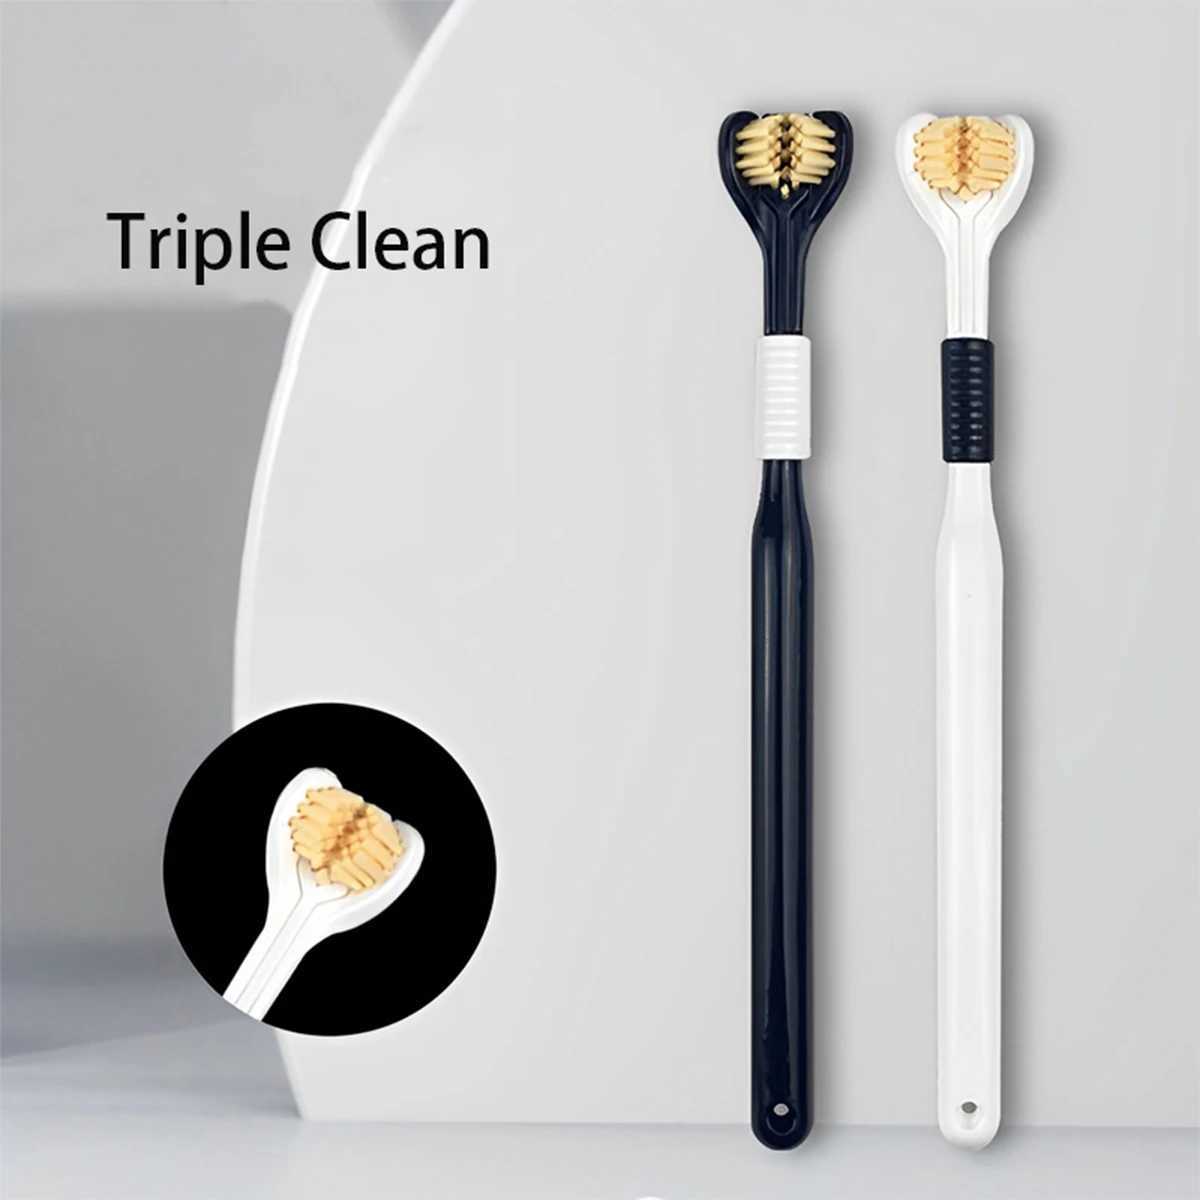 Toothbrush Triple Sided Toothbrush Soft Bristles Tongue Scraping Three Heads U-Shaped Three Sides at Once Triple Cleaning Portable For Home